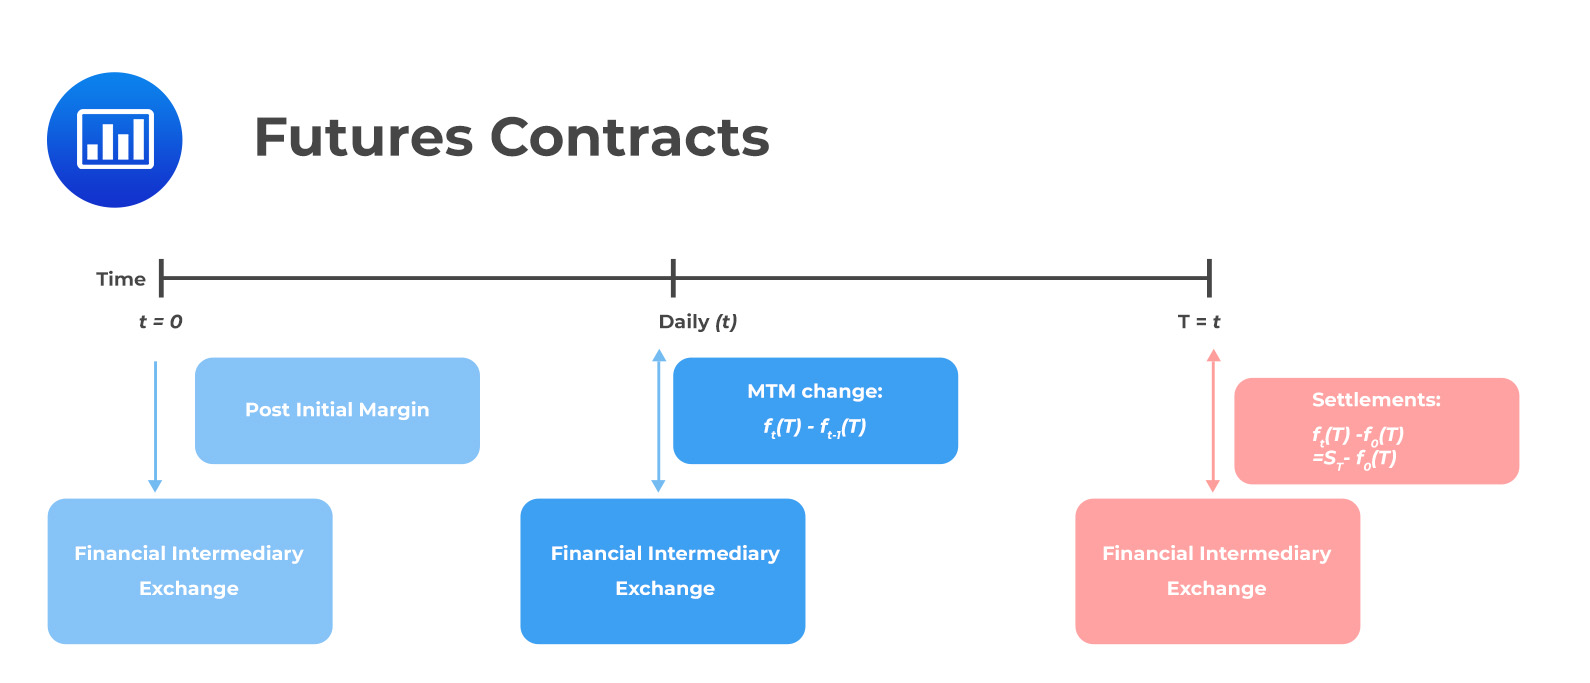 How Many Futures Contracts Should You Buy?